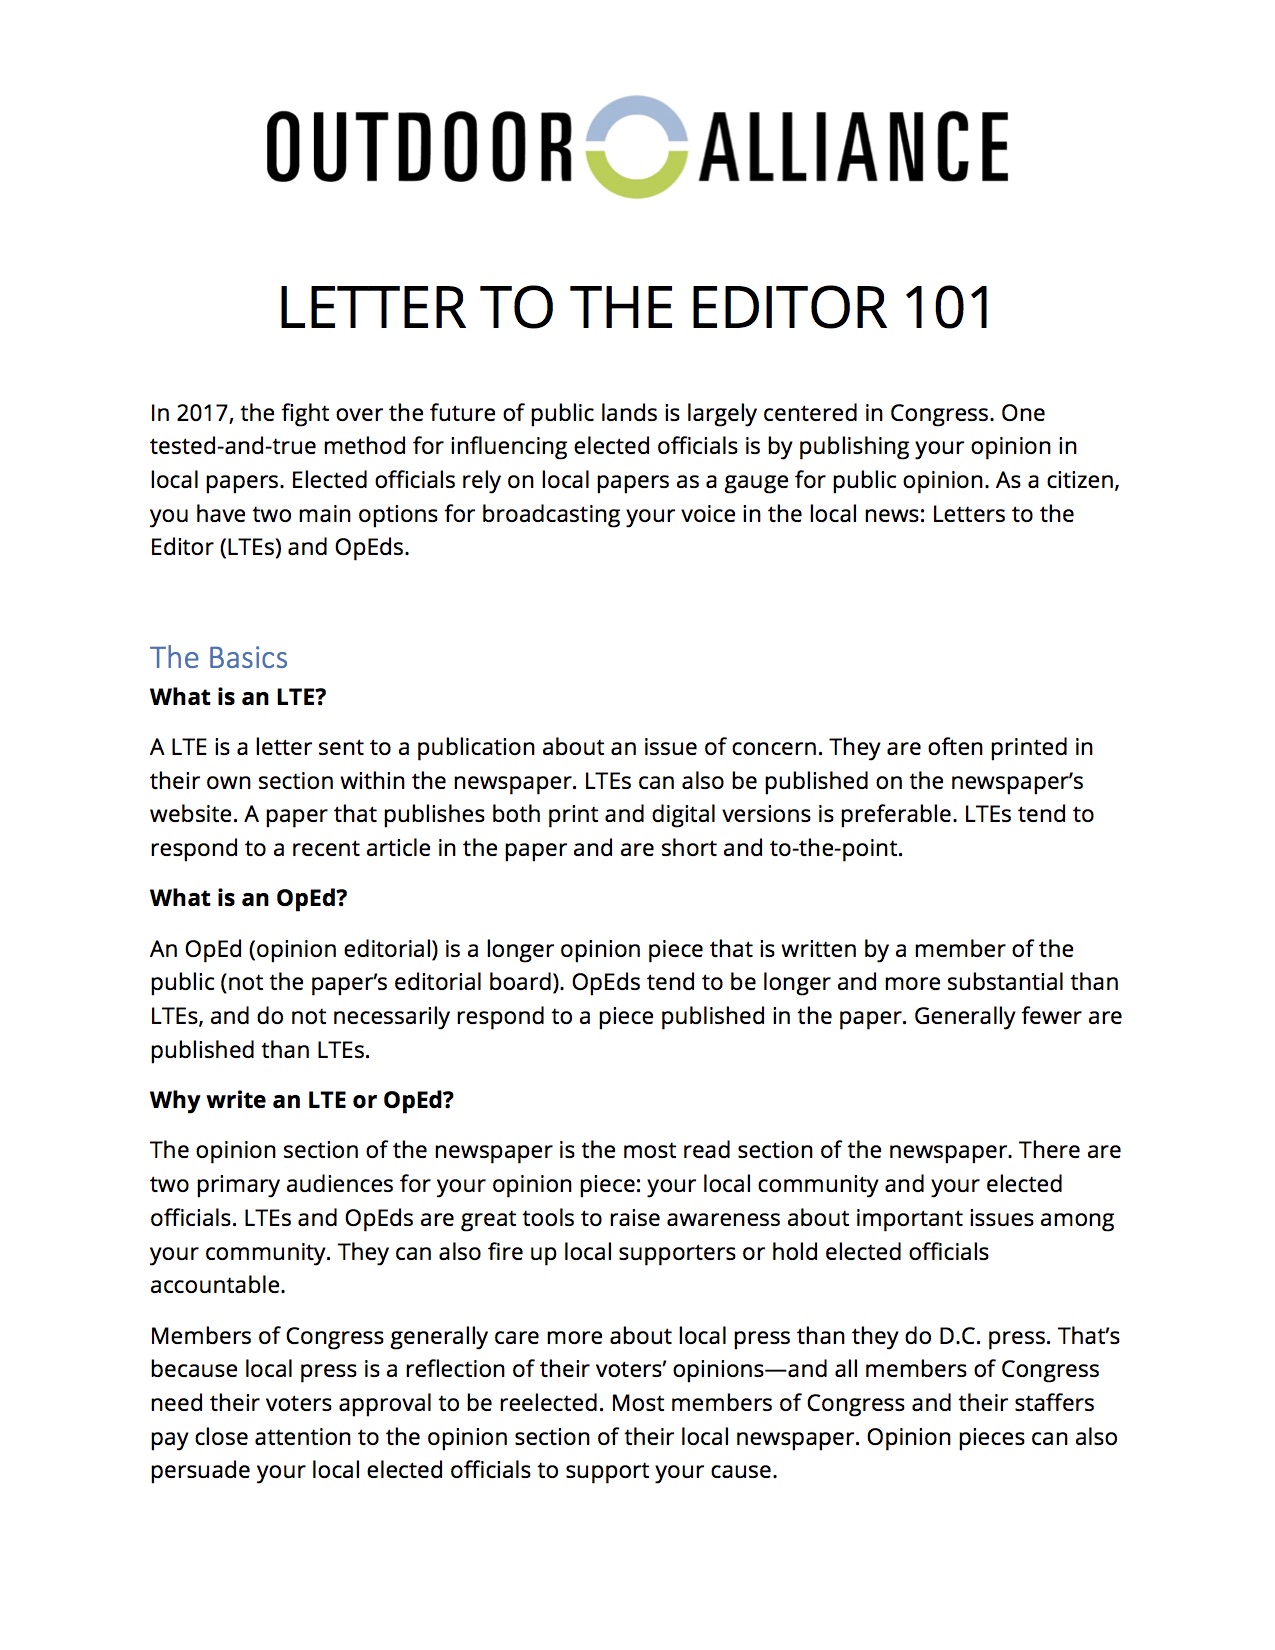 writing a letter to the editor